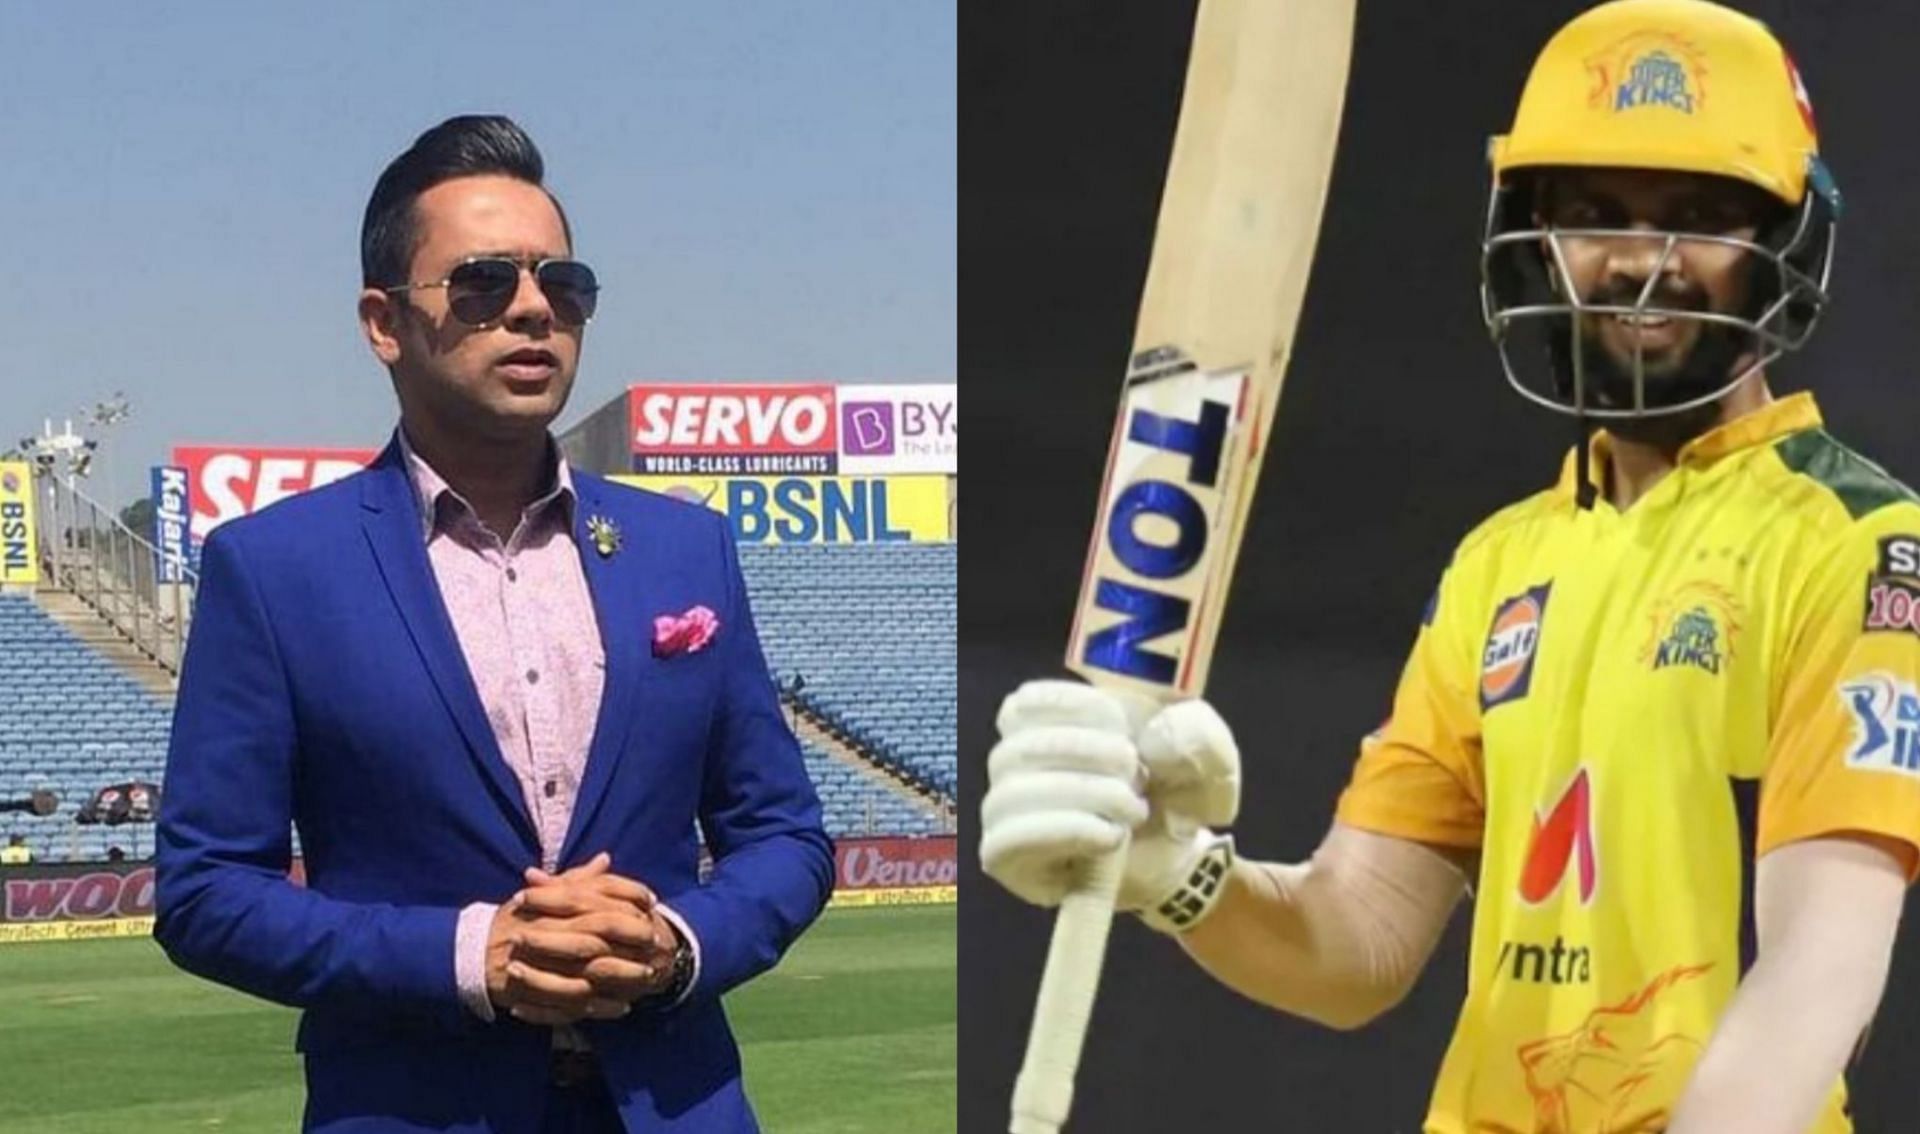 Chopra (L) named Ruturaj Gaikwad as the best young Indian talent in the IPL 2021